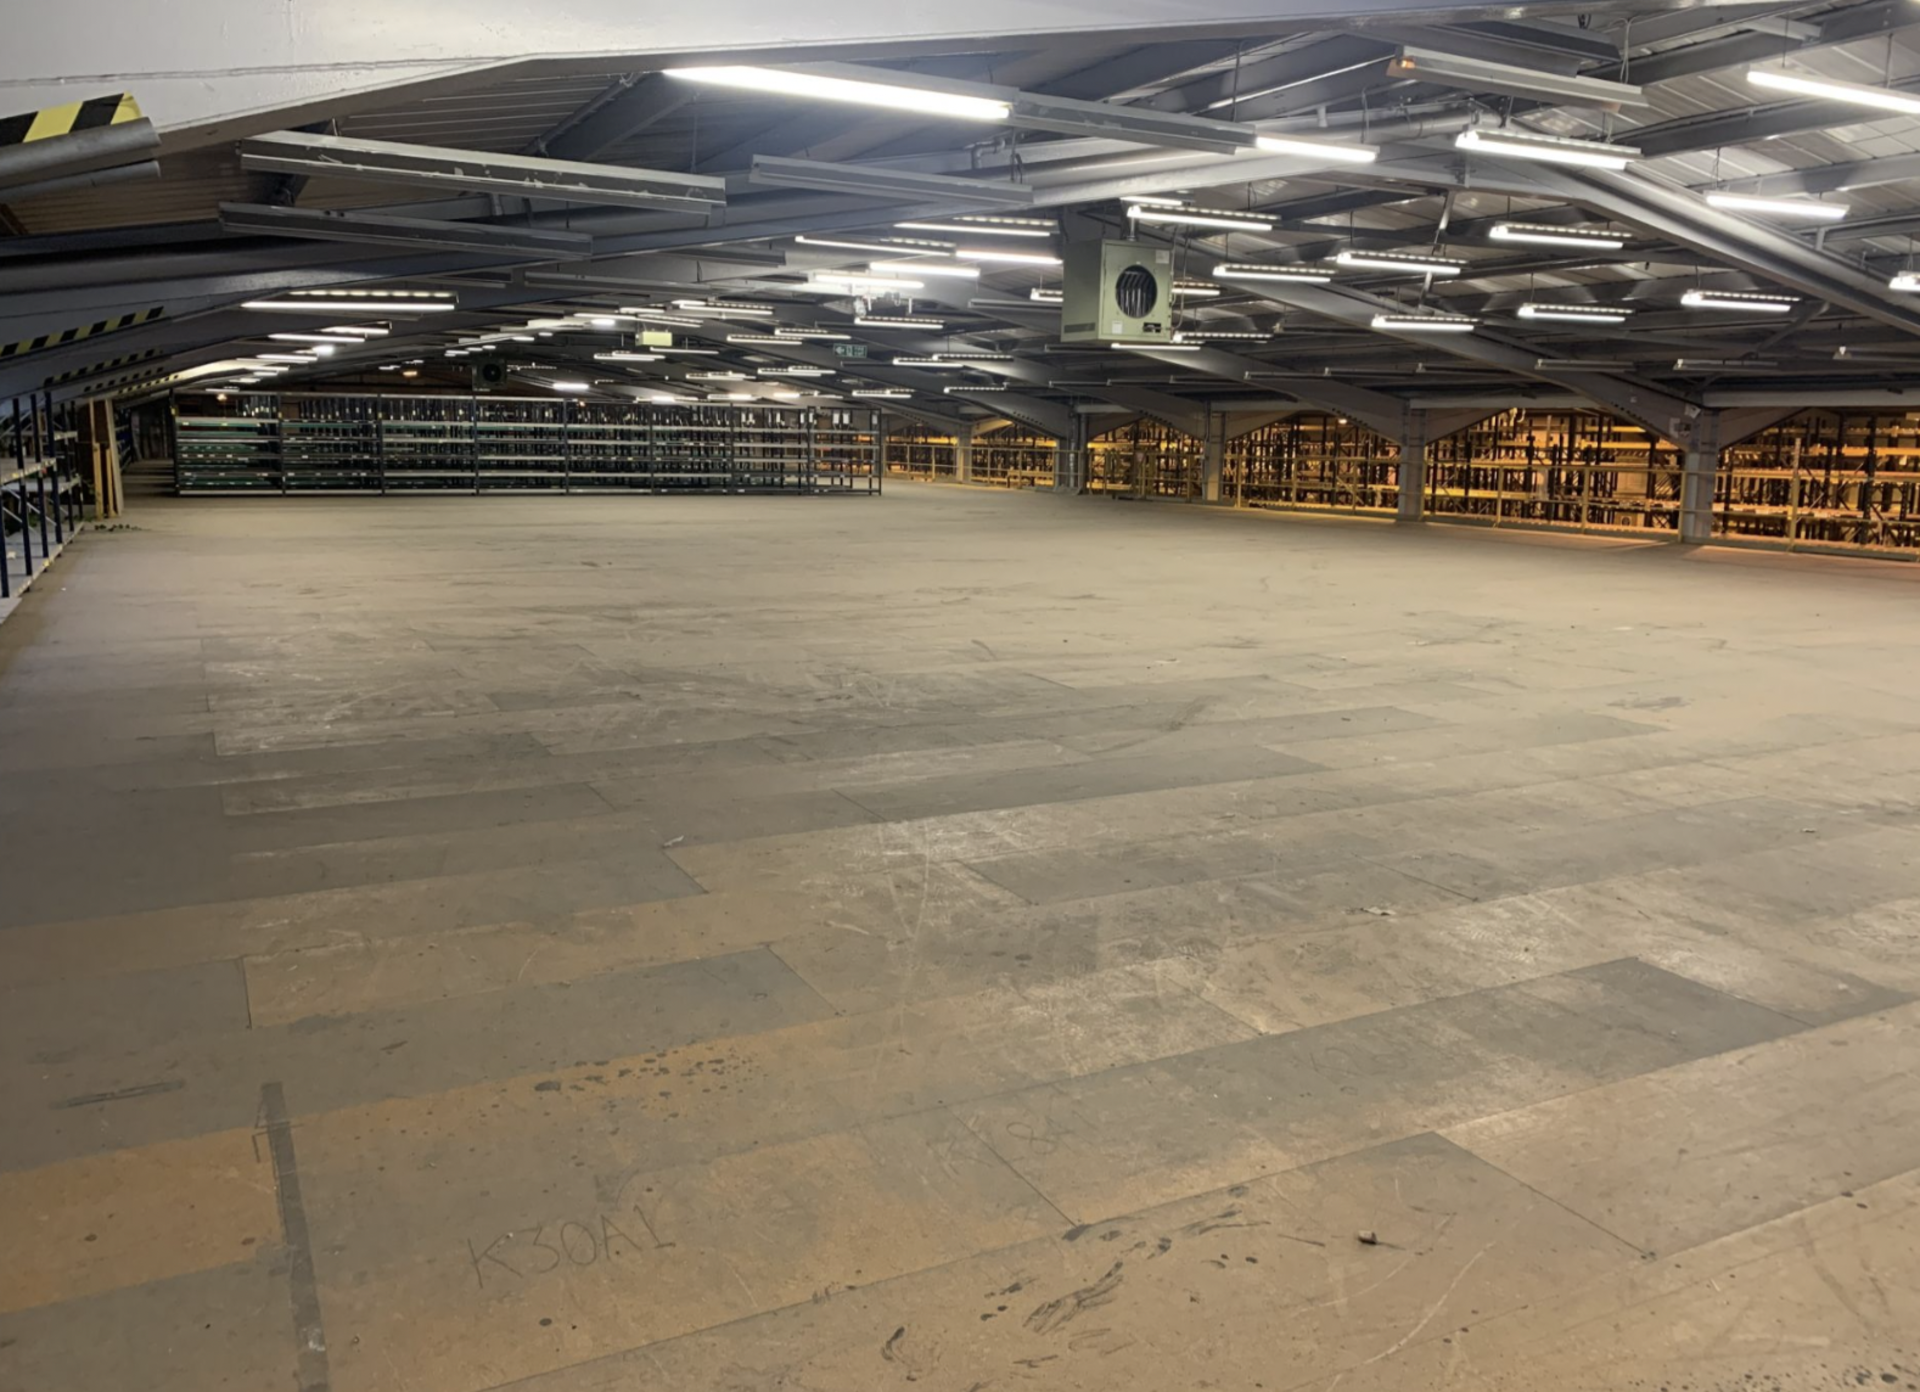 £500,000 MEZZANINE FLOOR 80m x 28m 3 stairs and loading bay inc - Image 21 of 21